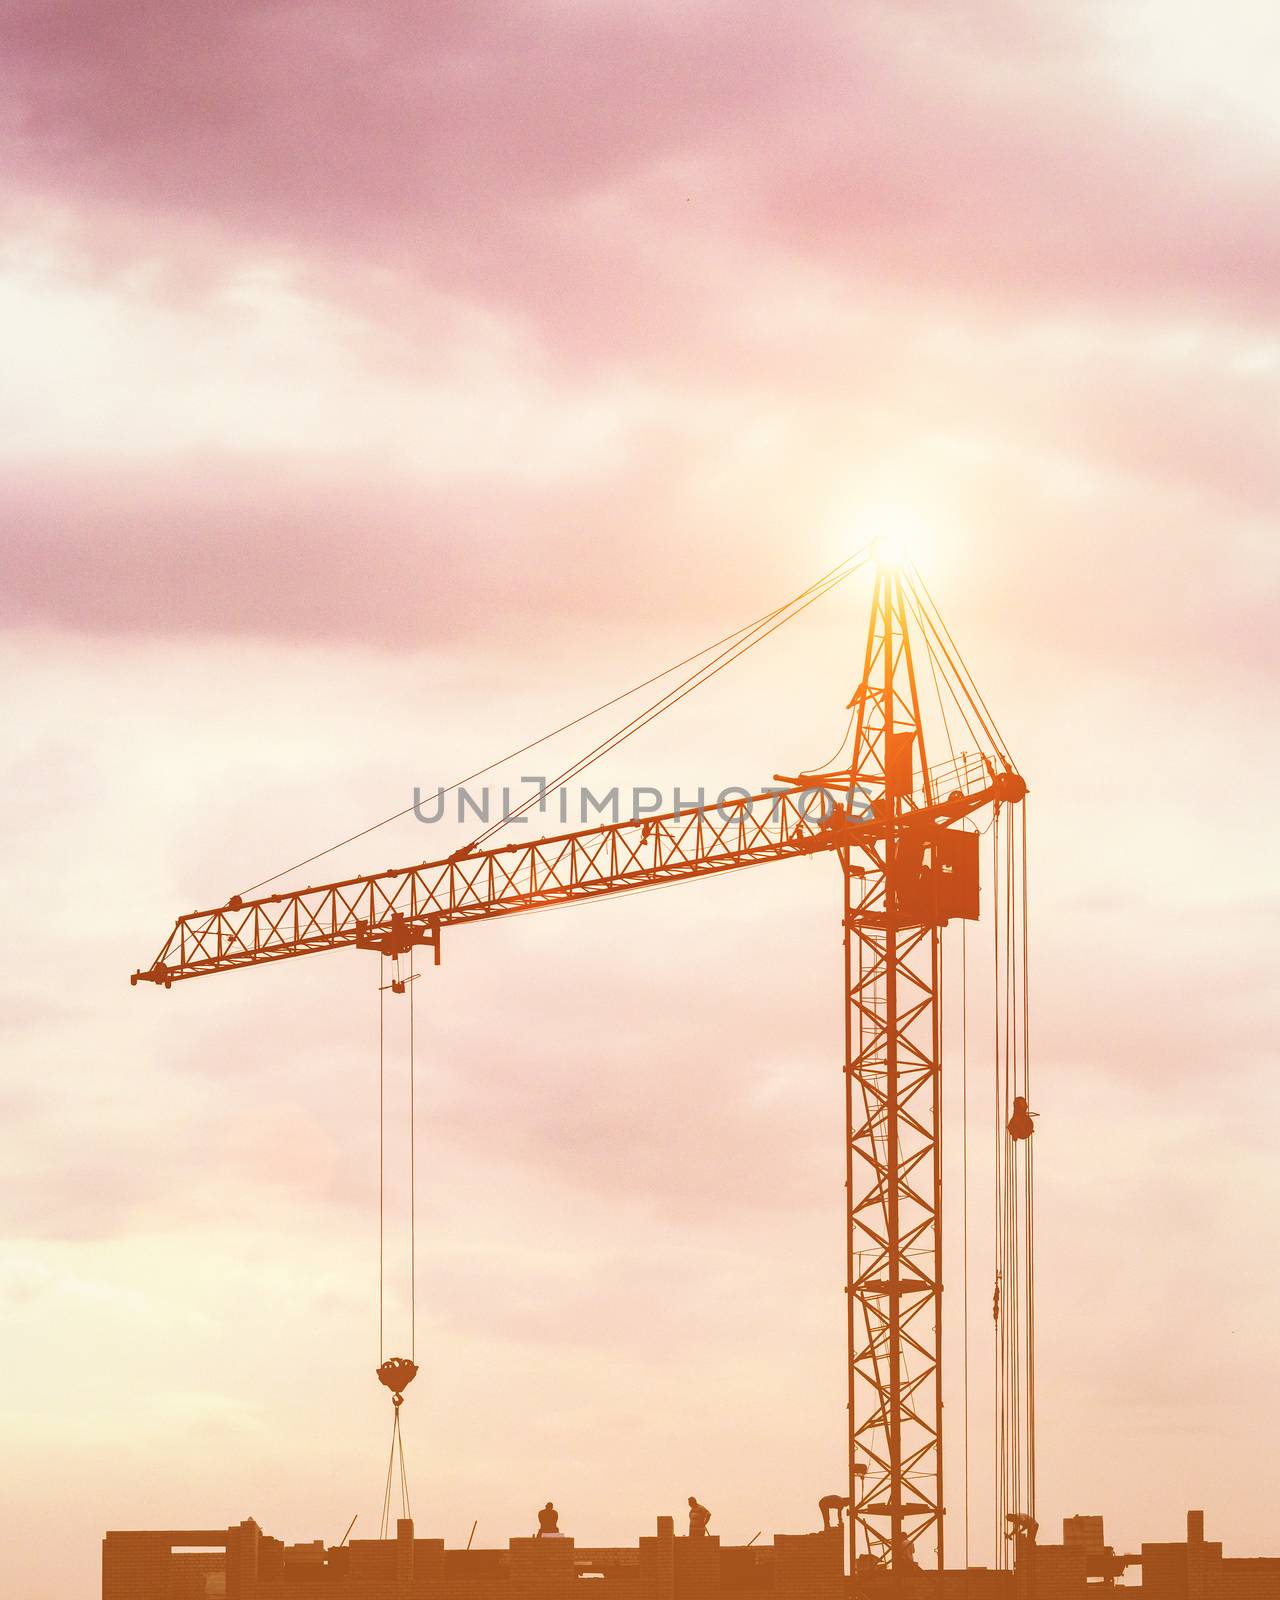 Silhouette of a team of construction workers in and a crane constructing a building on the background of the evening sunset sky.